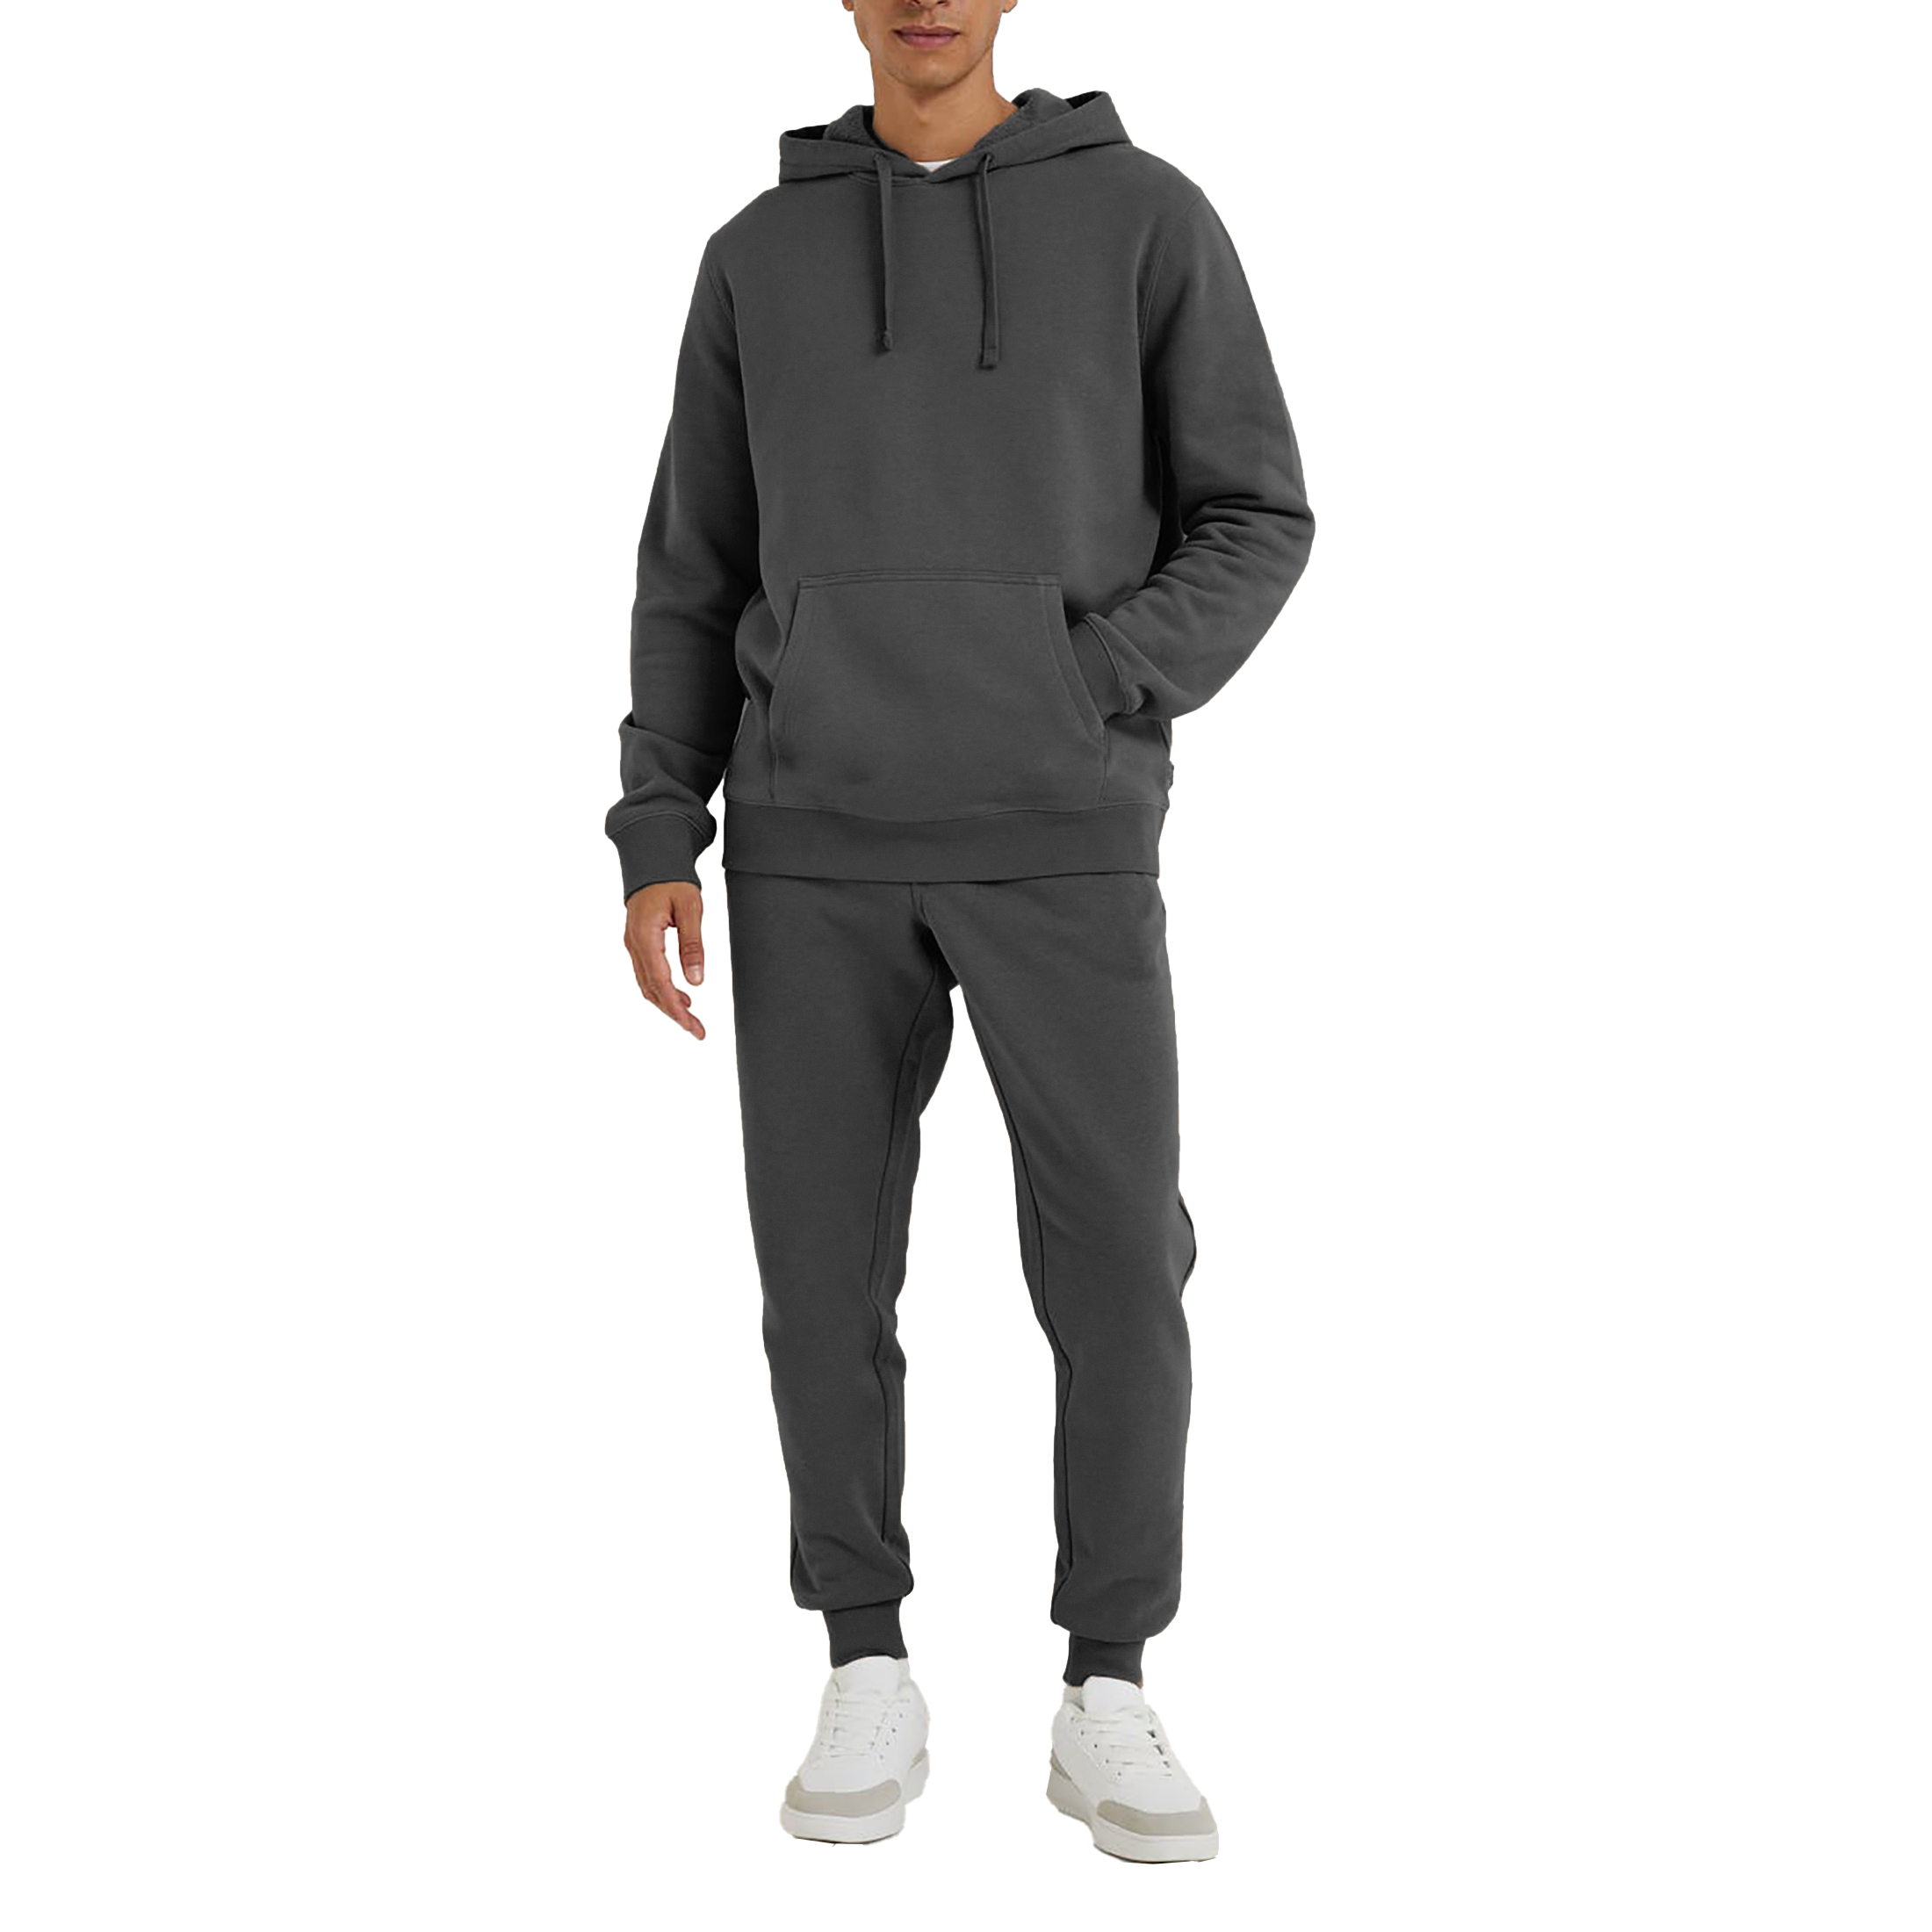 Men's Athletic Warm Jogging Pullover Active Tracksuit - Charcoal, Medium